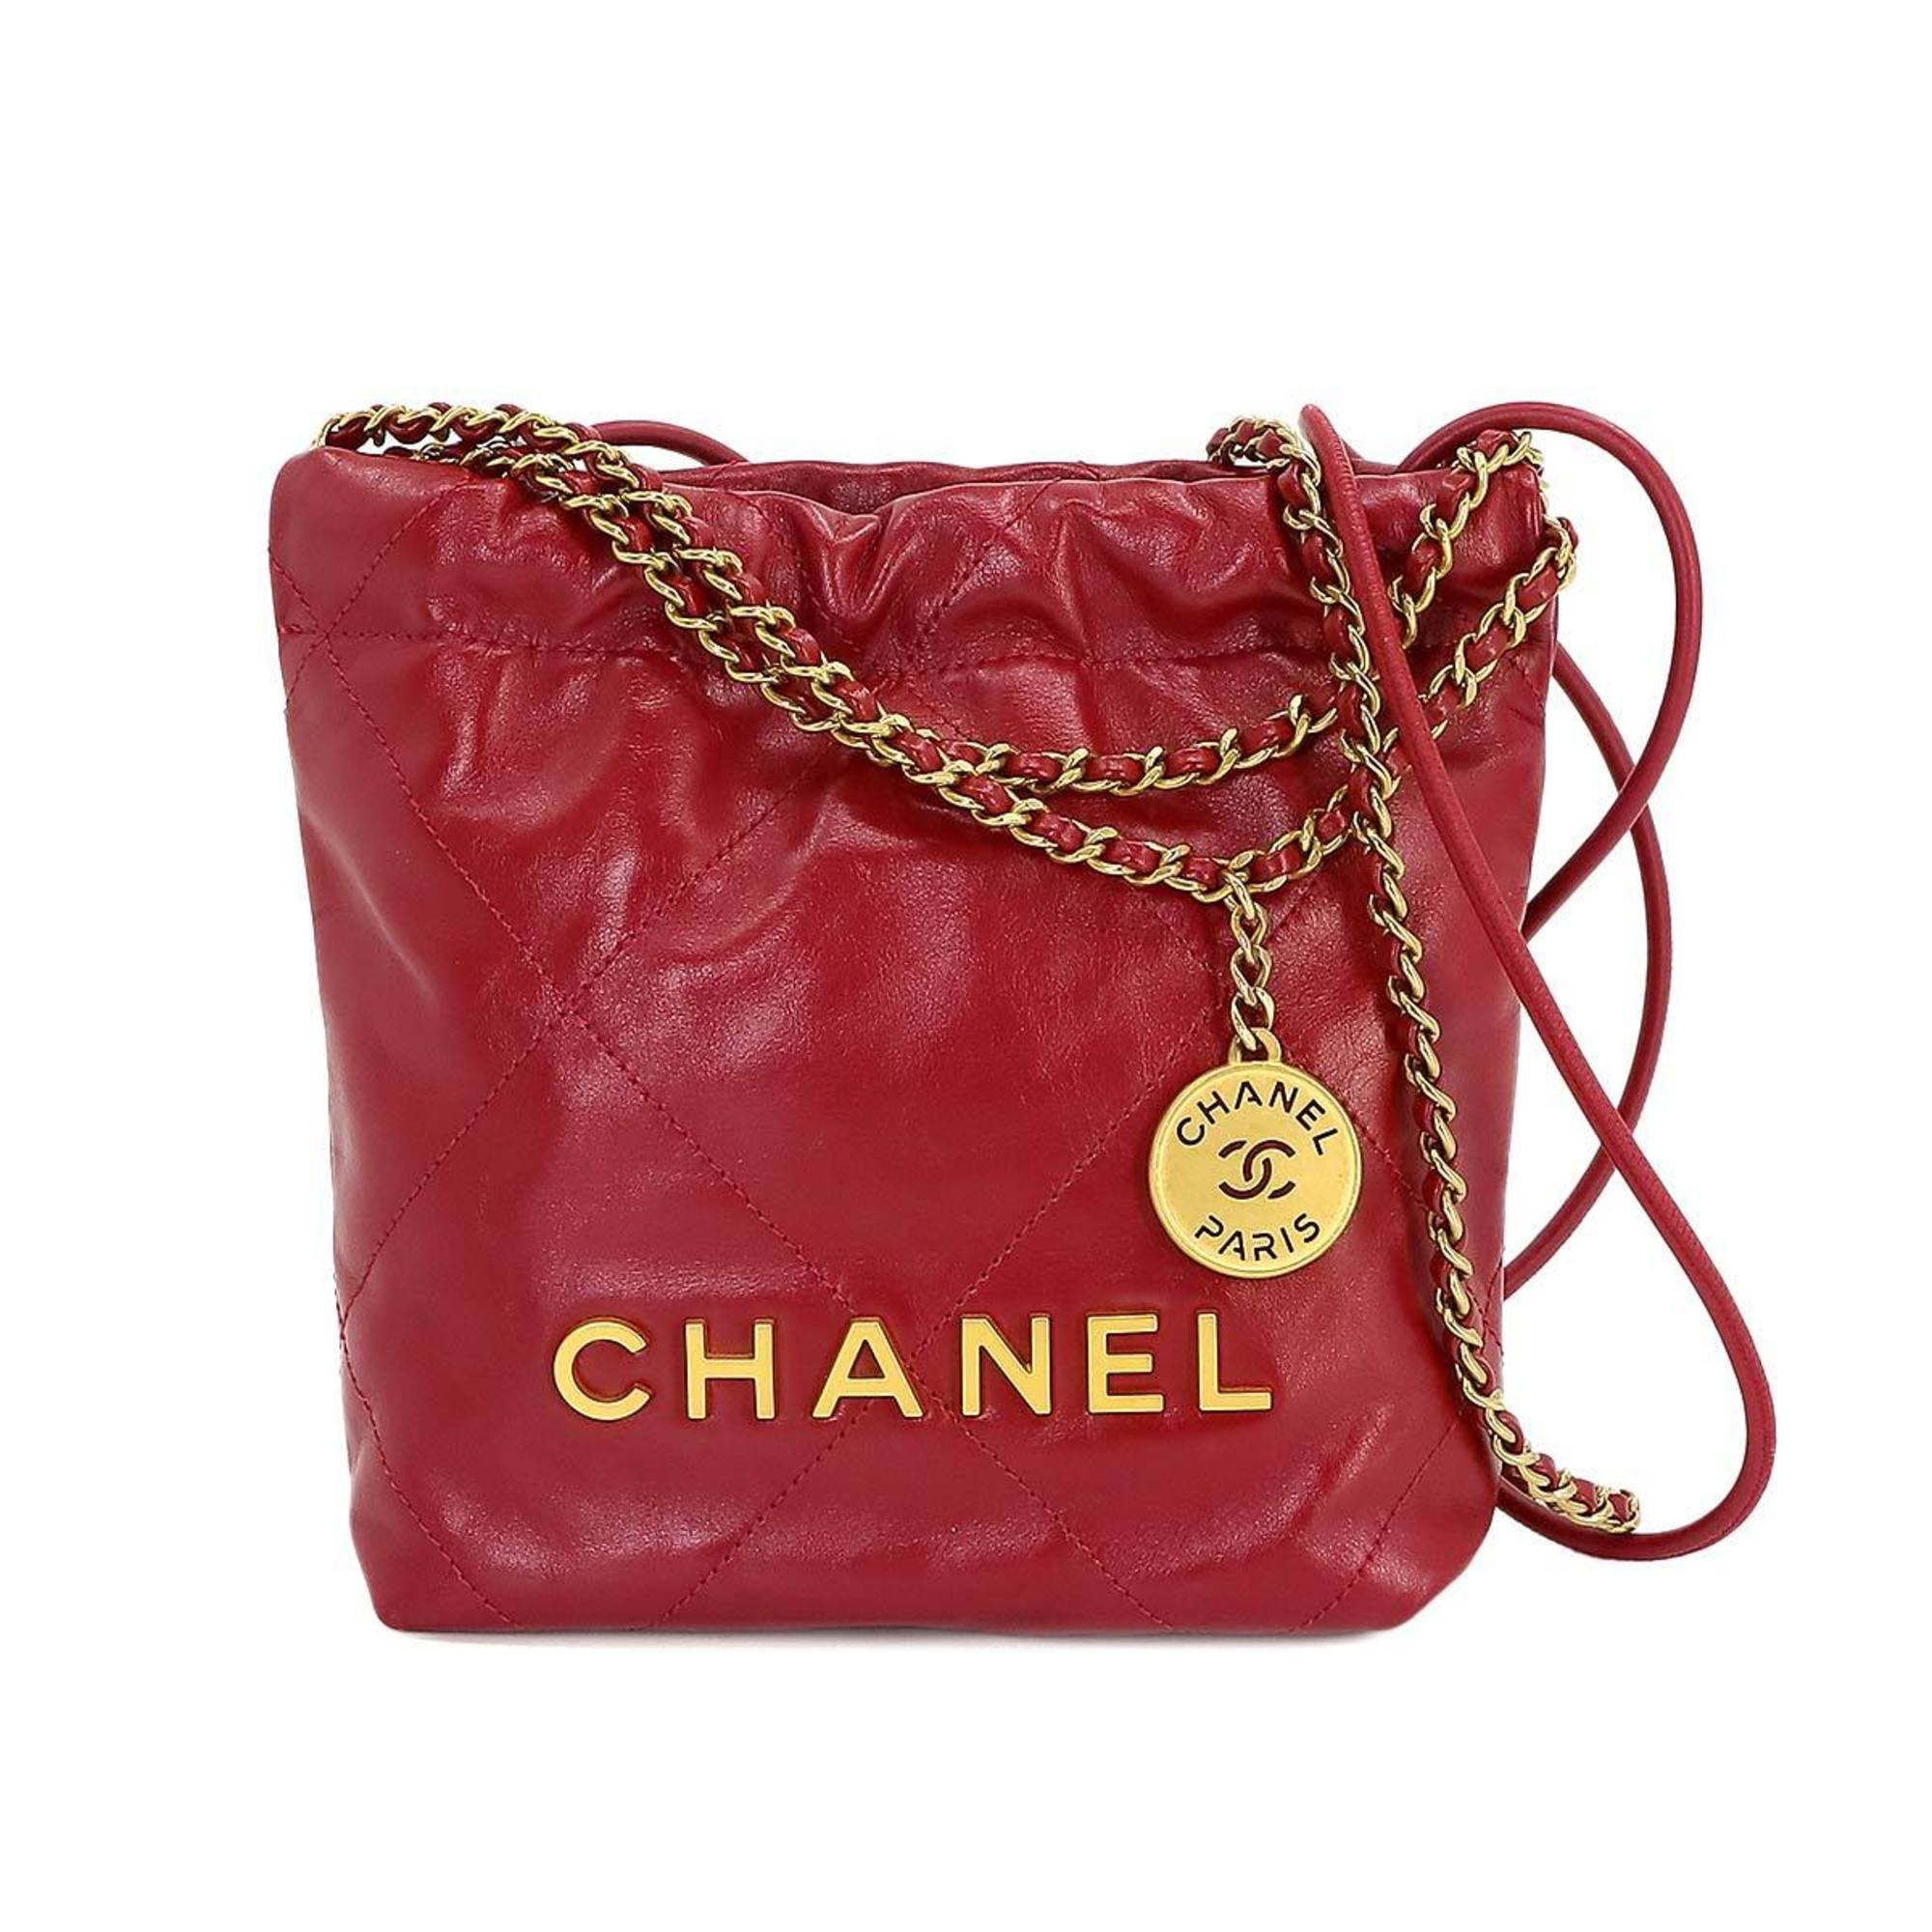 CHANEL 22 2way chain hand shoulder bag leather red AS3980 Mini Bag